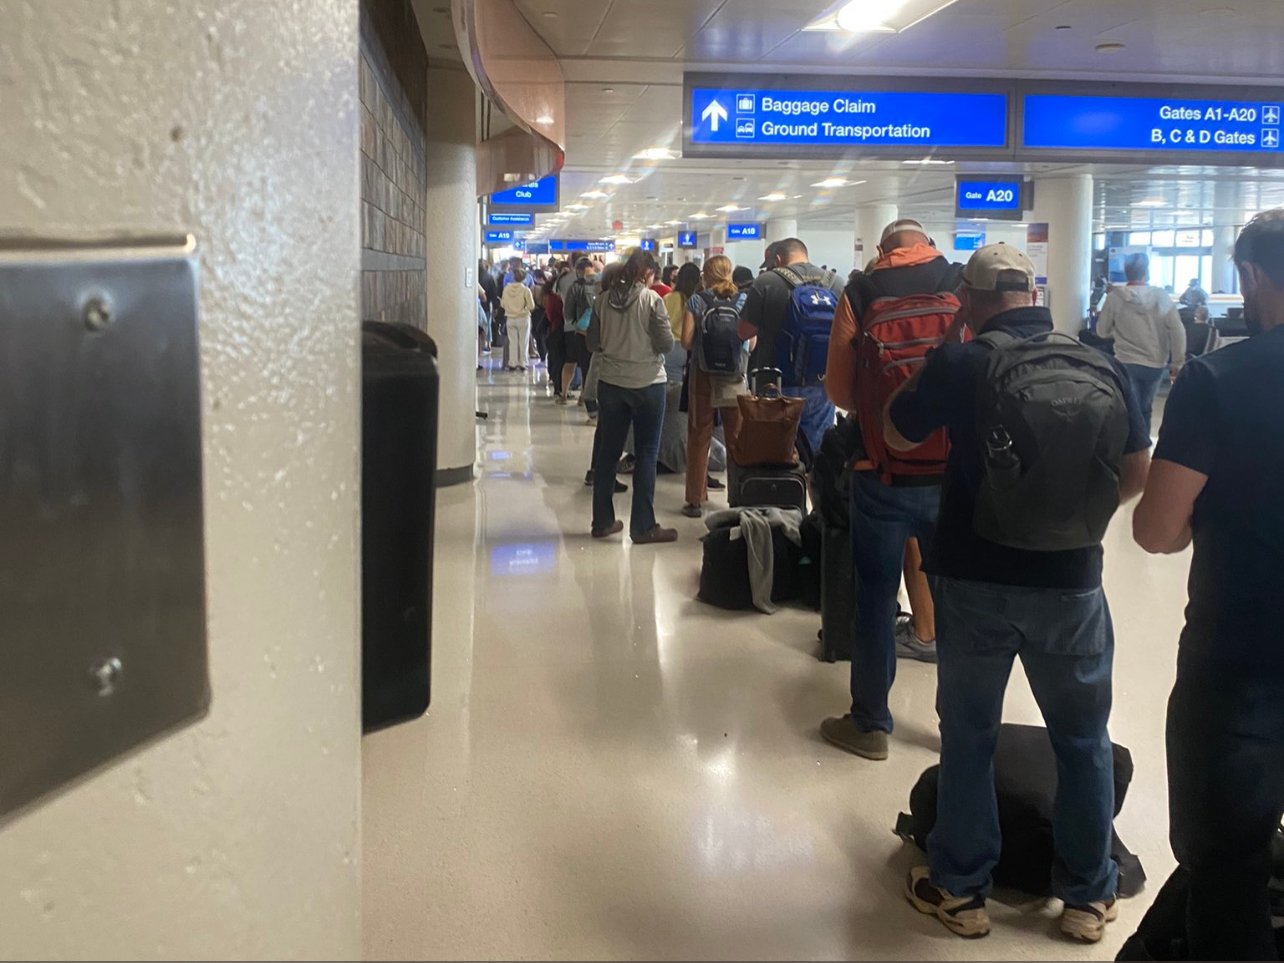  BREAKING EXCLUSIVE: American Airlines Cancels 98 Flights At Phoenix Sky Harbor – Whistleblower Reveals Weather Is NOT The Cause, It’s Crew Shortages